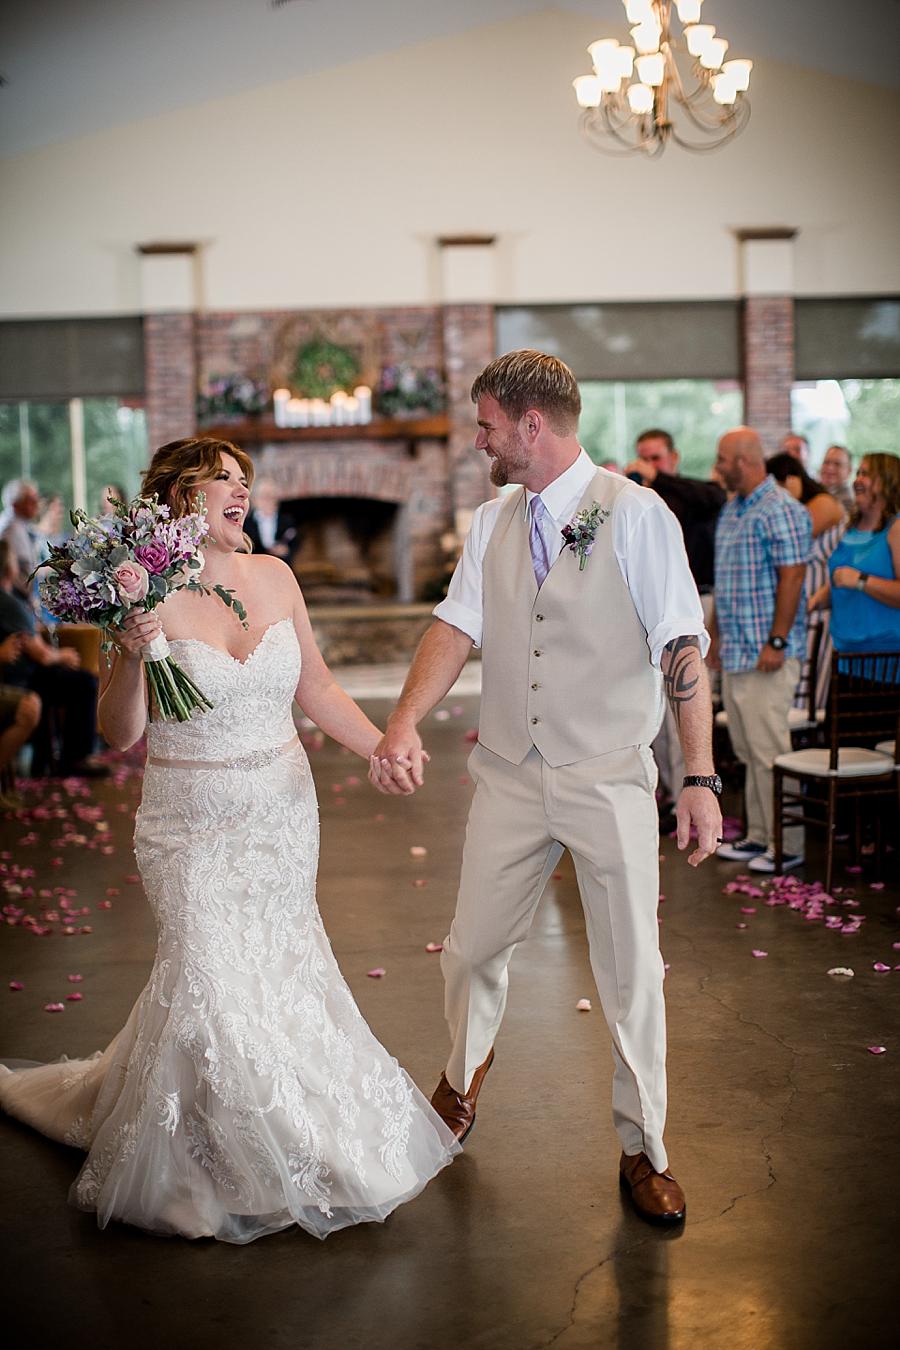 Happily married at this Hunter Valley Pavilion Wedding by Knoxville Wedding Photographer, Amanda May Photos.